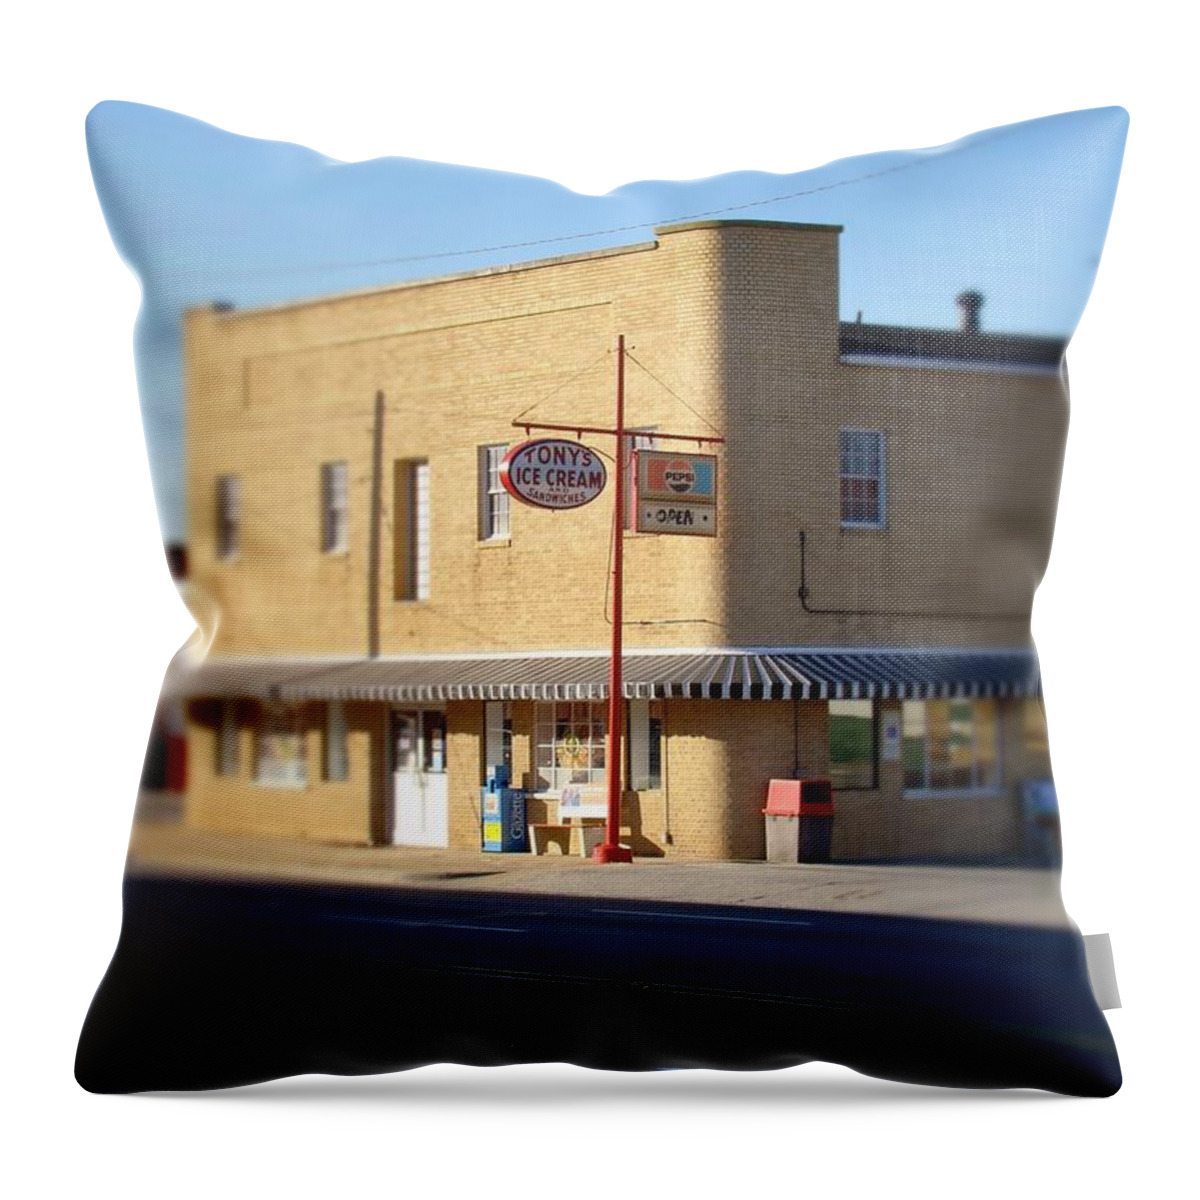 Ice Cream Shop Throw Pillow featuring the photograph Tony's Ice Cream by Rodney Lee Williams